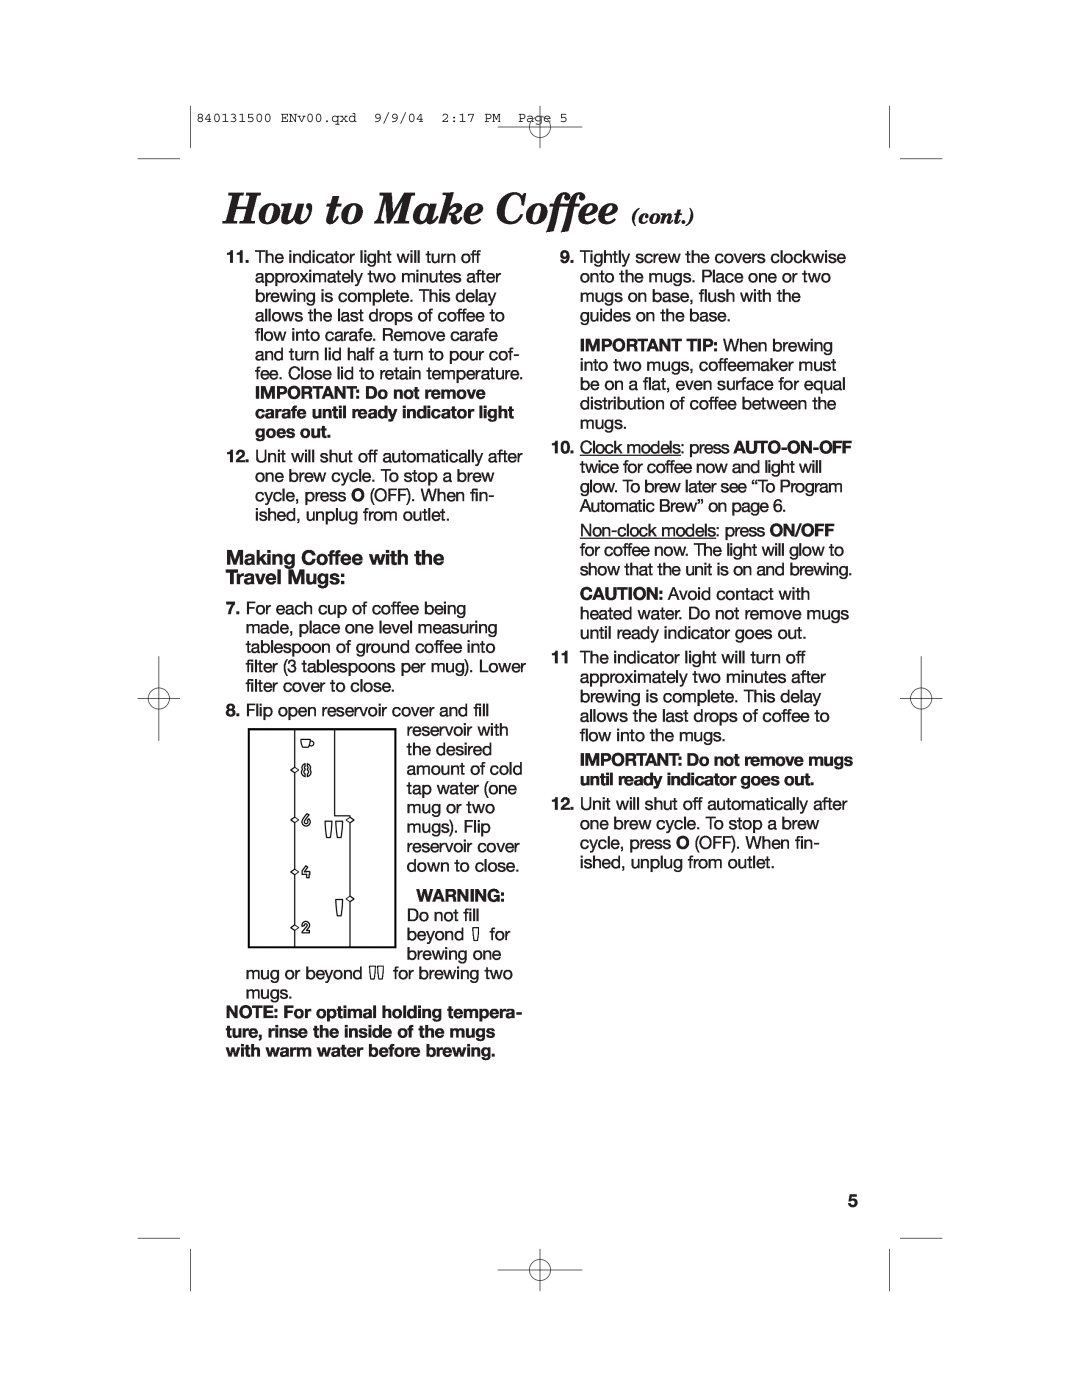 Hamilton Beach 45214, 45114, 45234 manual How to Make Coffee cont, Making Coffee with the Travel Mugs 